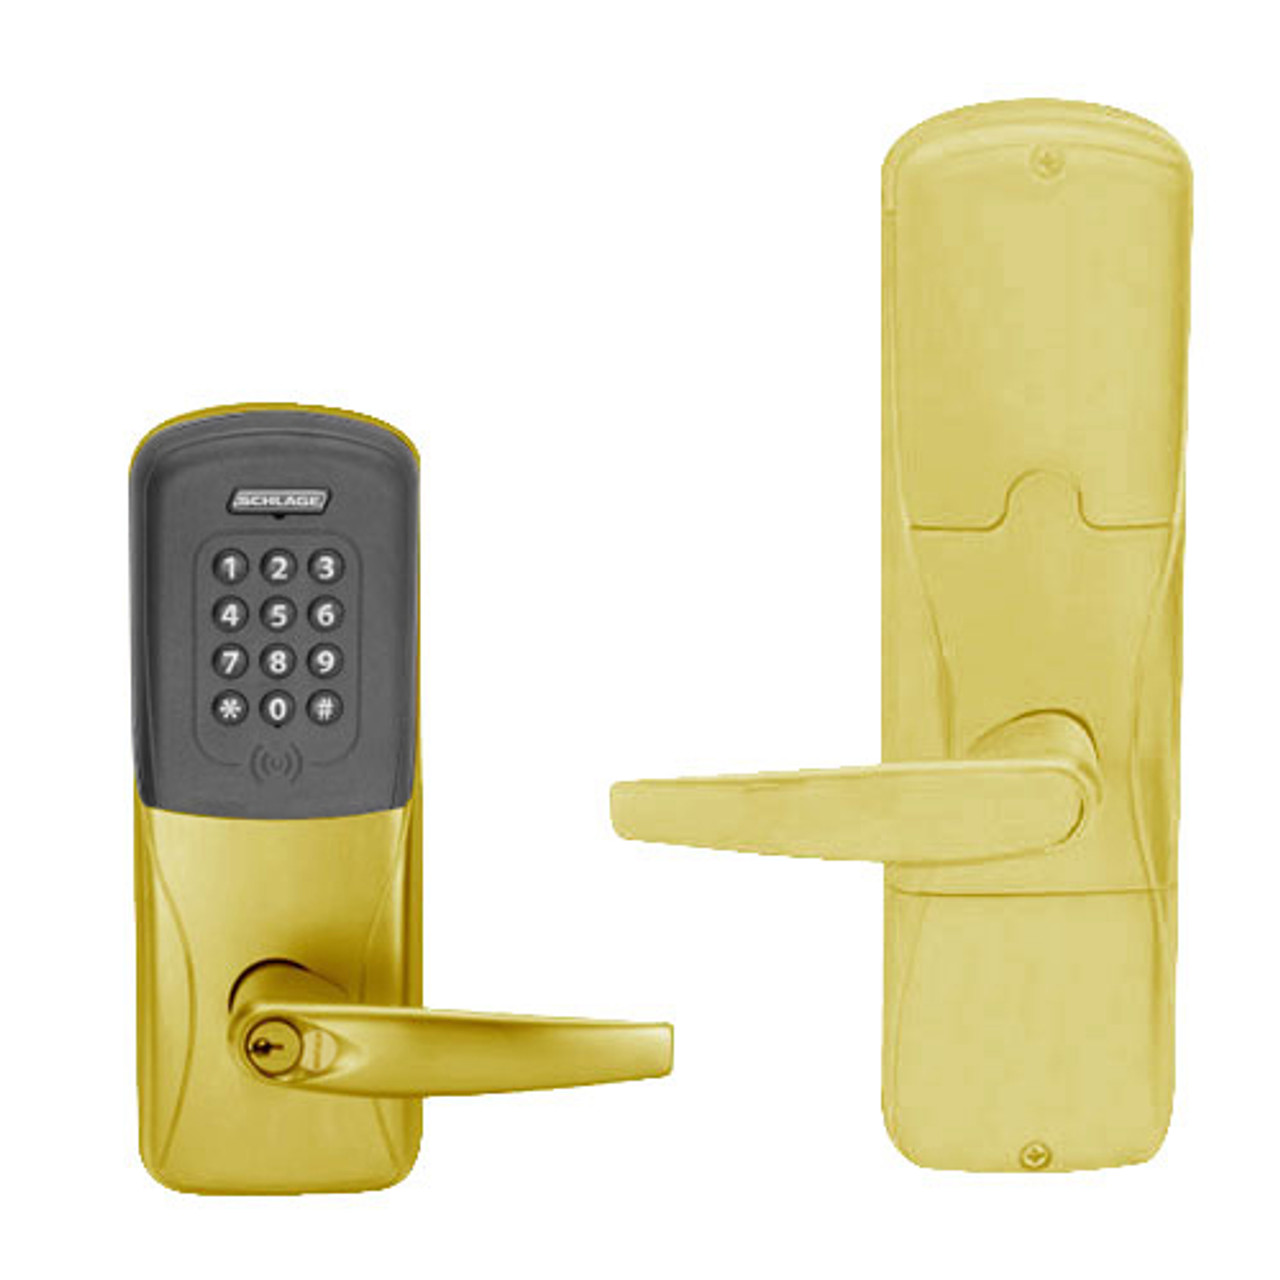 AD200-MD-40-MTK-ATH-GD-29R-605 Schlage Privacy Mortise Deadbolt Multi-Technology Keypad Lock with Athens Lever in Bright Brass